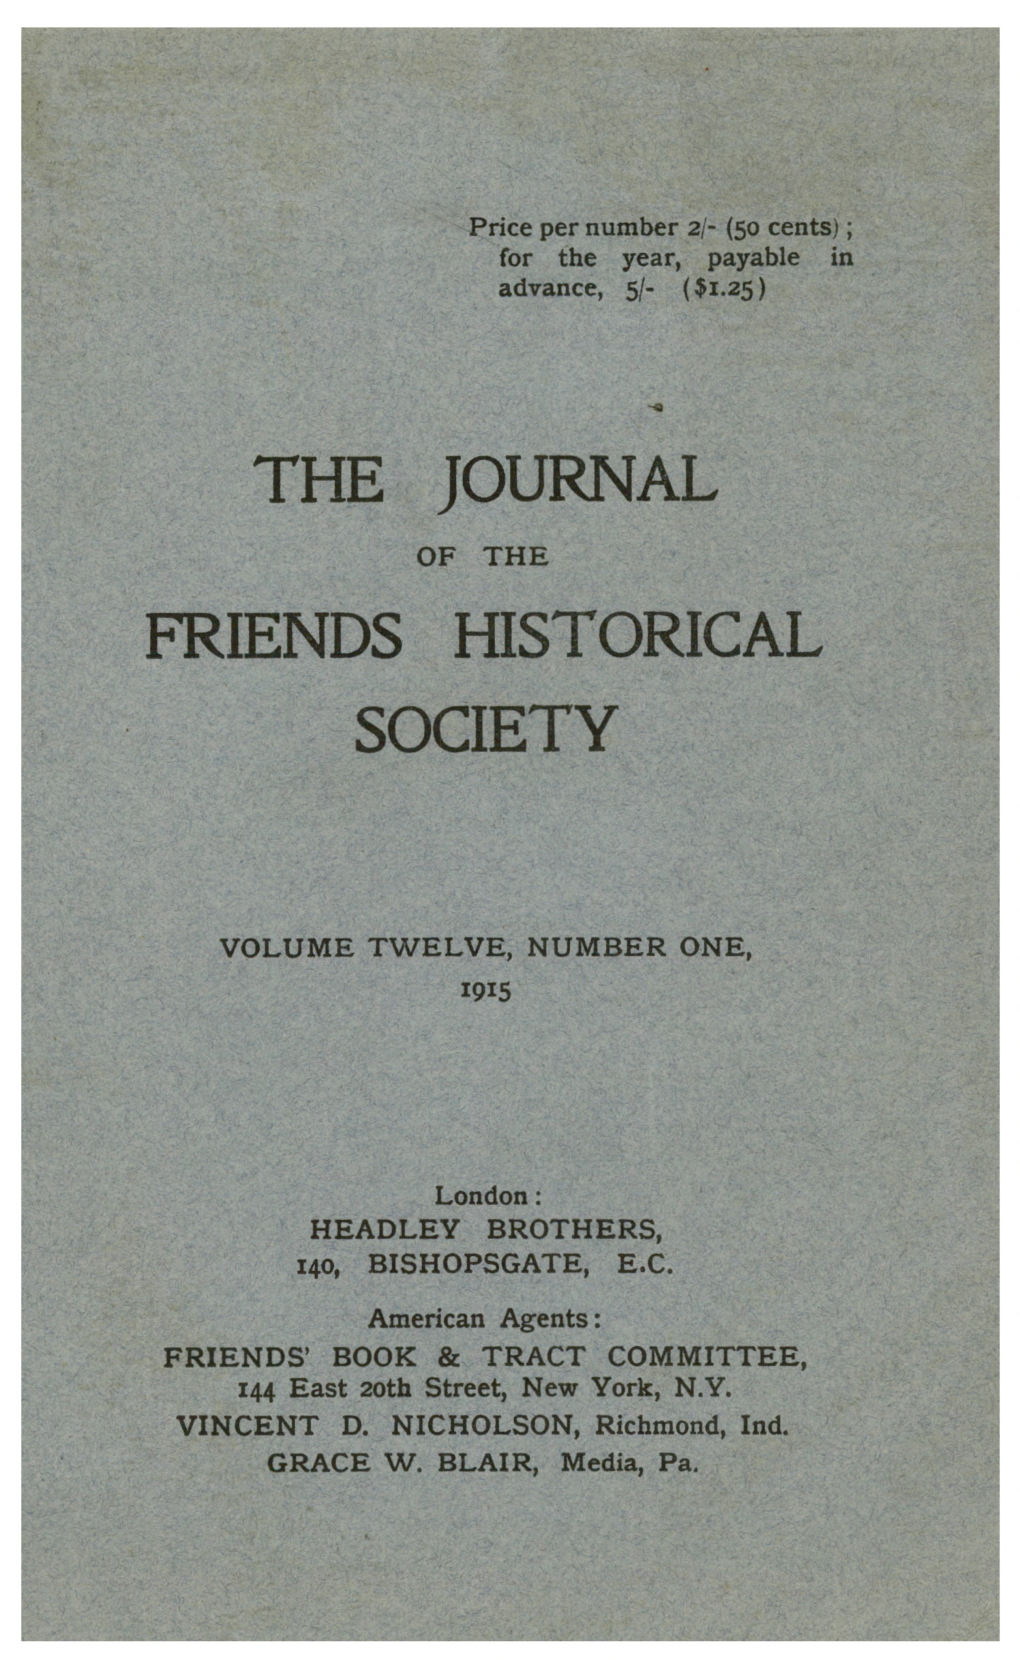 American Agents: FRIENDS' BOOK & TRACT COMMITTEE, 144 East 20Th Street, New York, N.Y